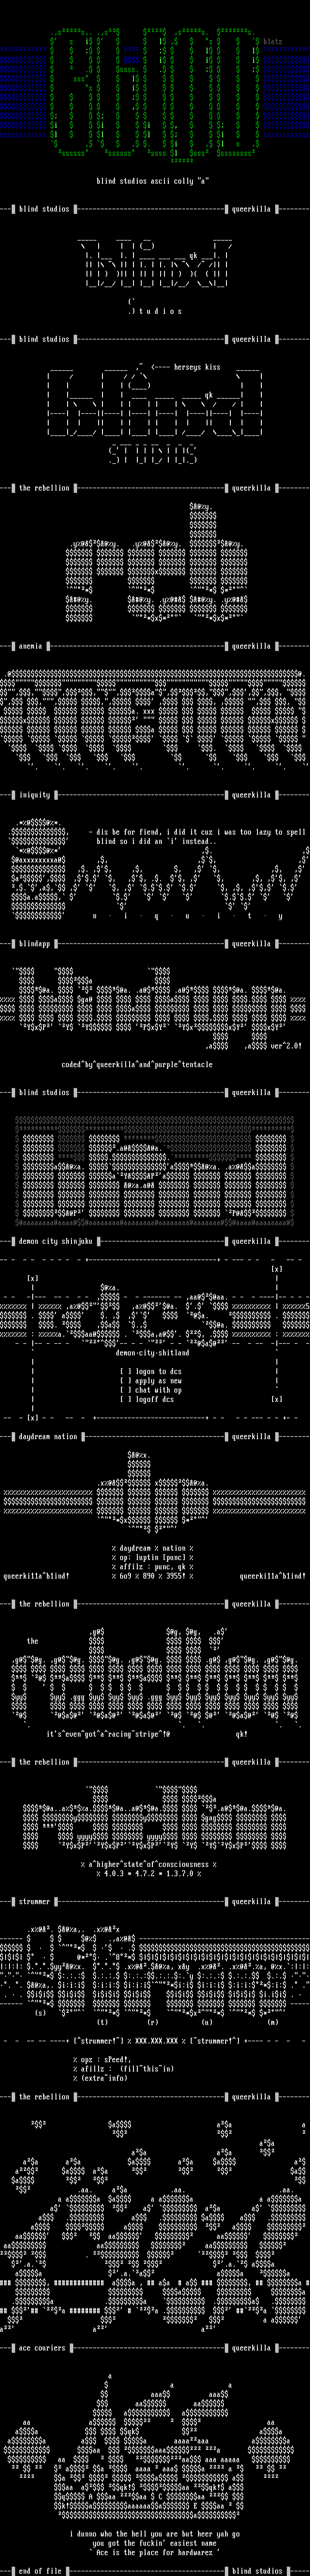 ascii collection "a" by Various Artists